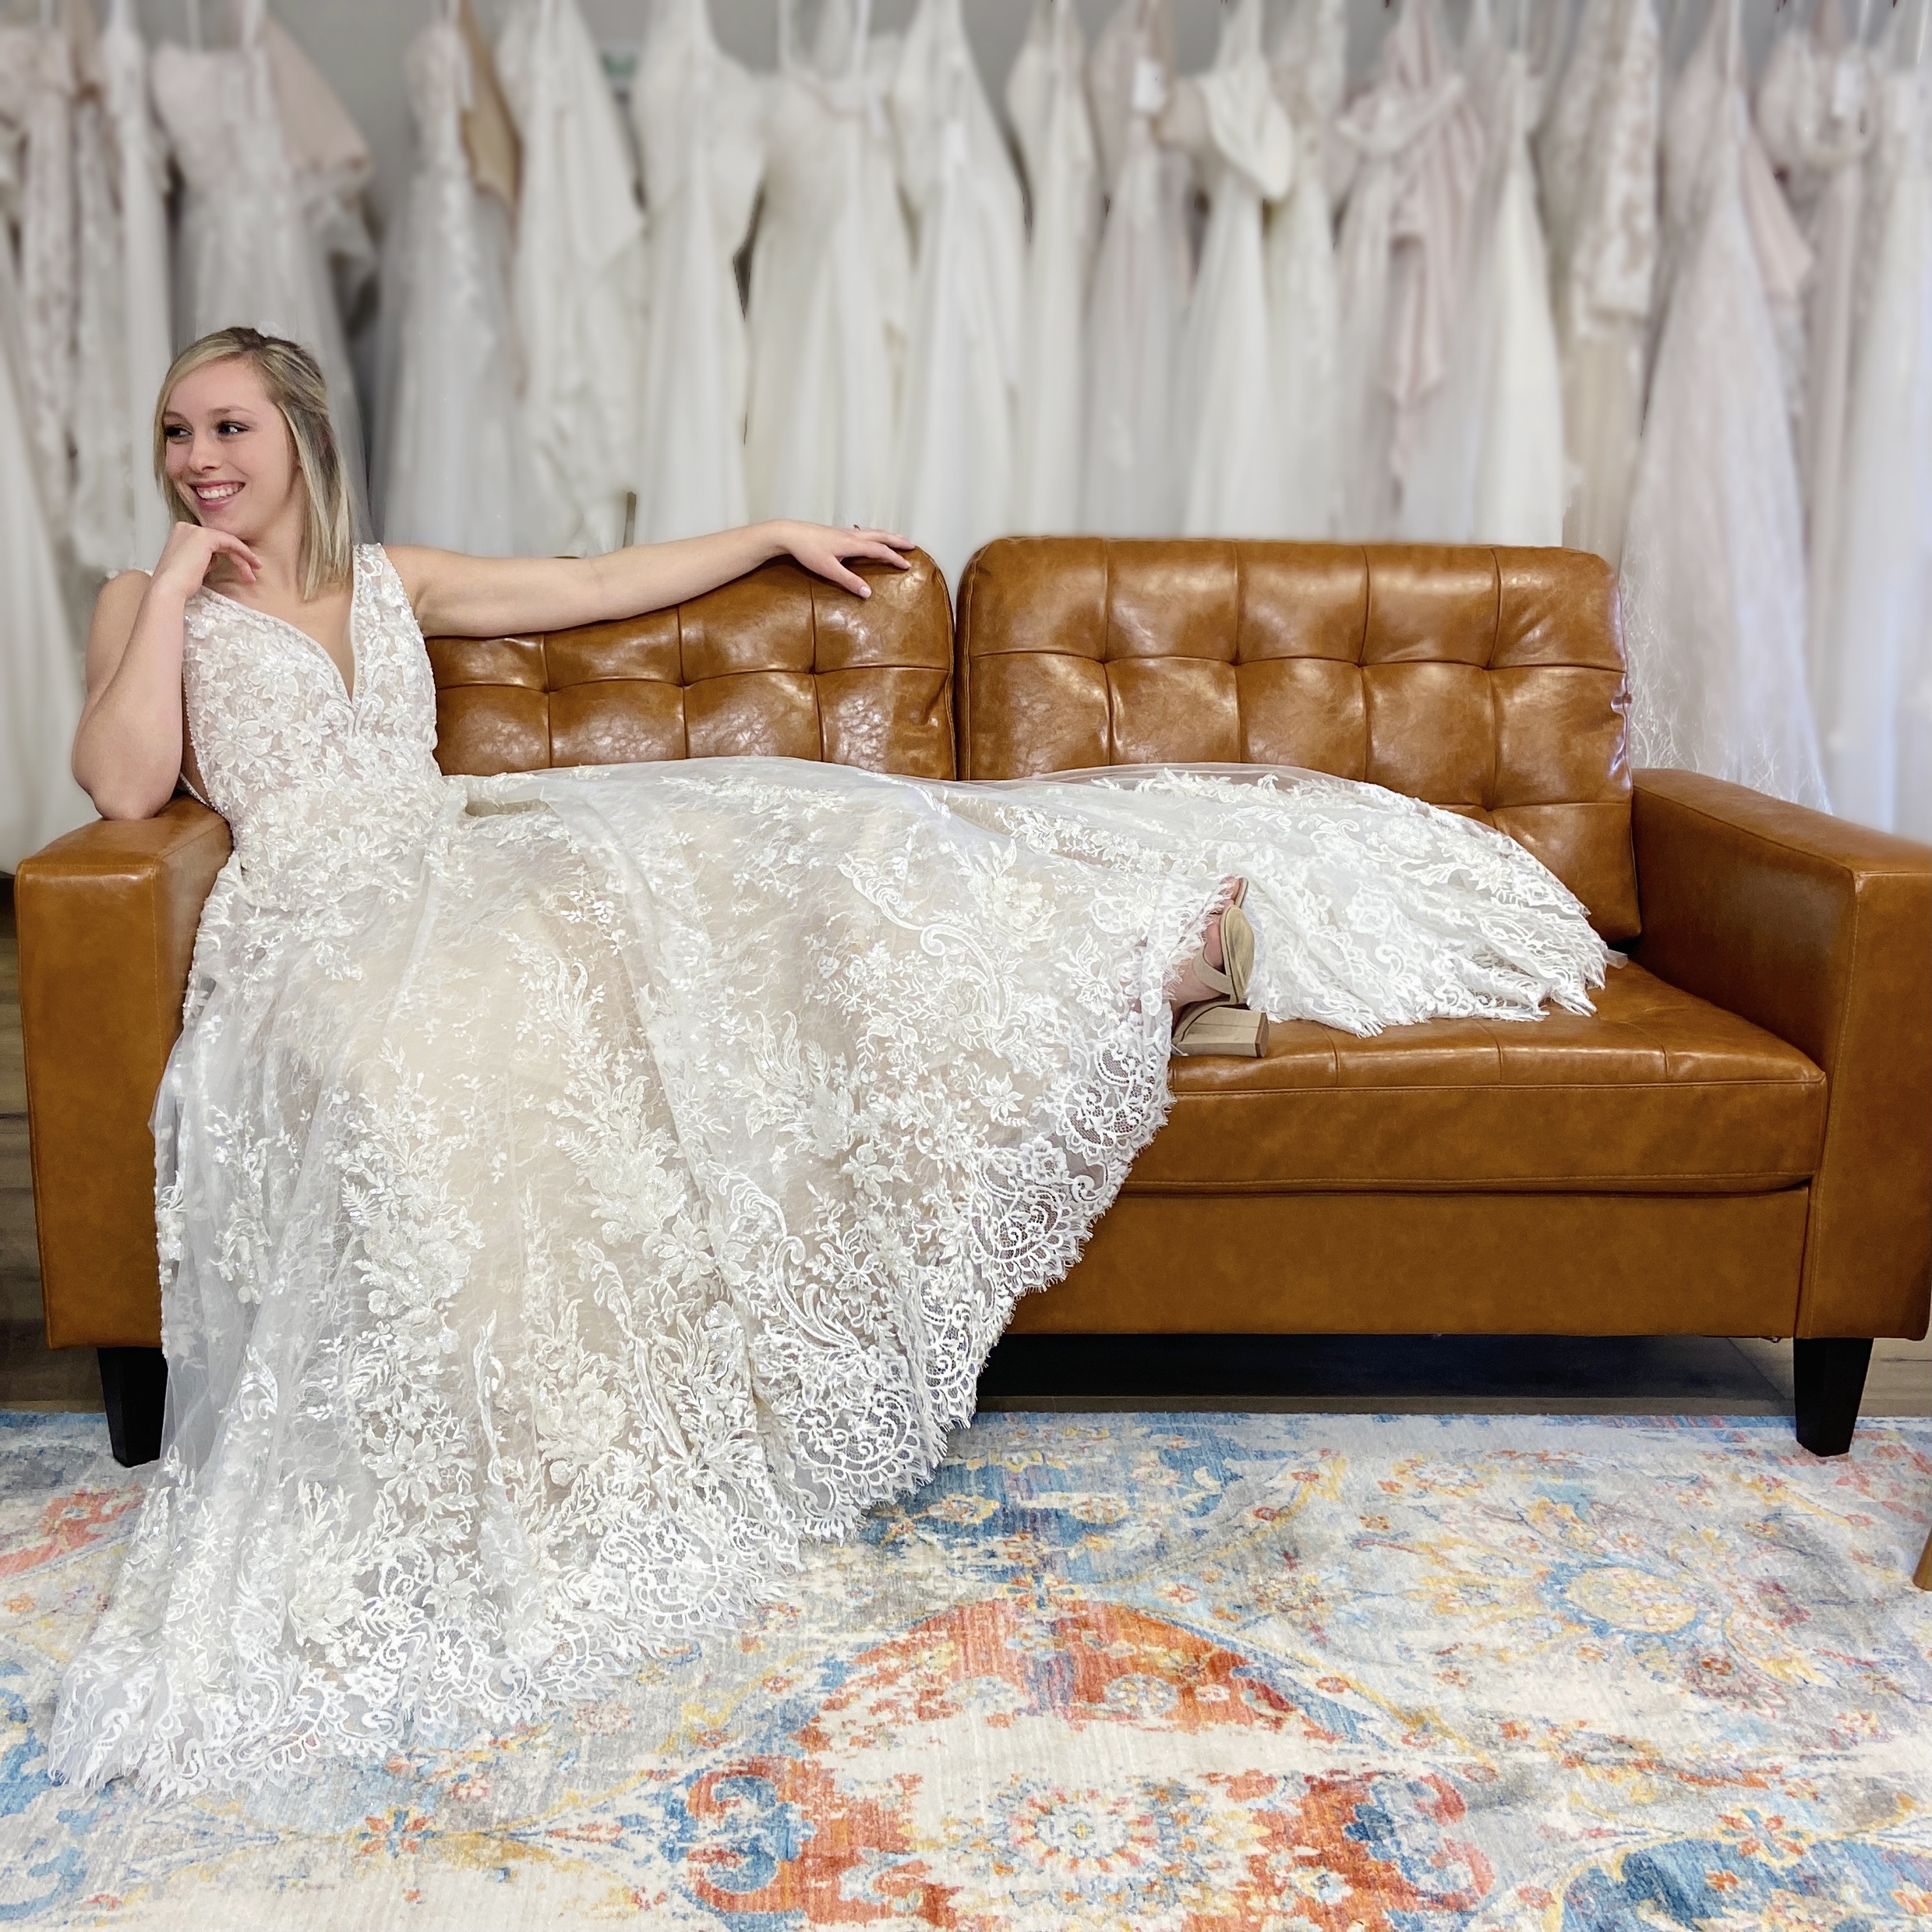 bride with feet up on couch